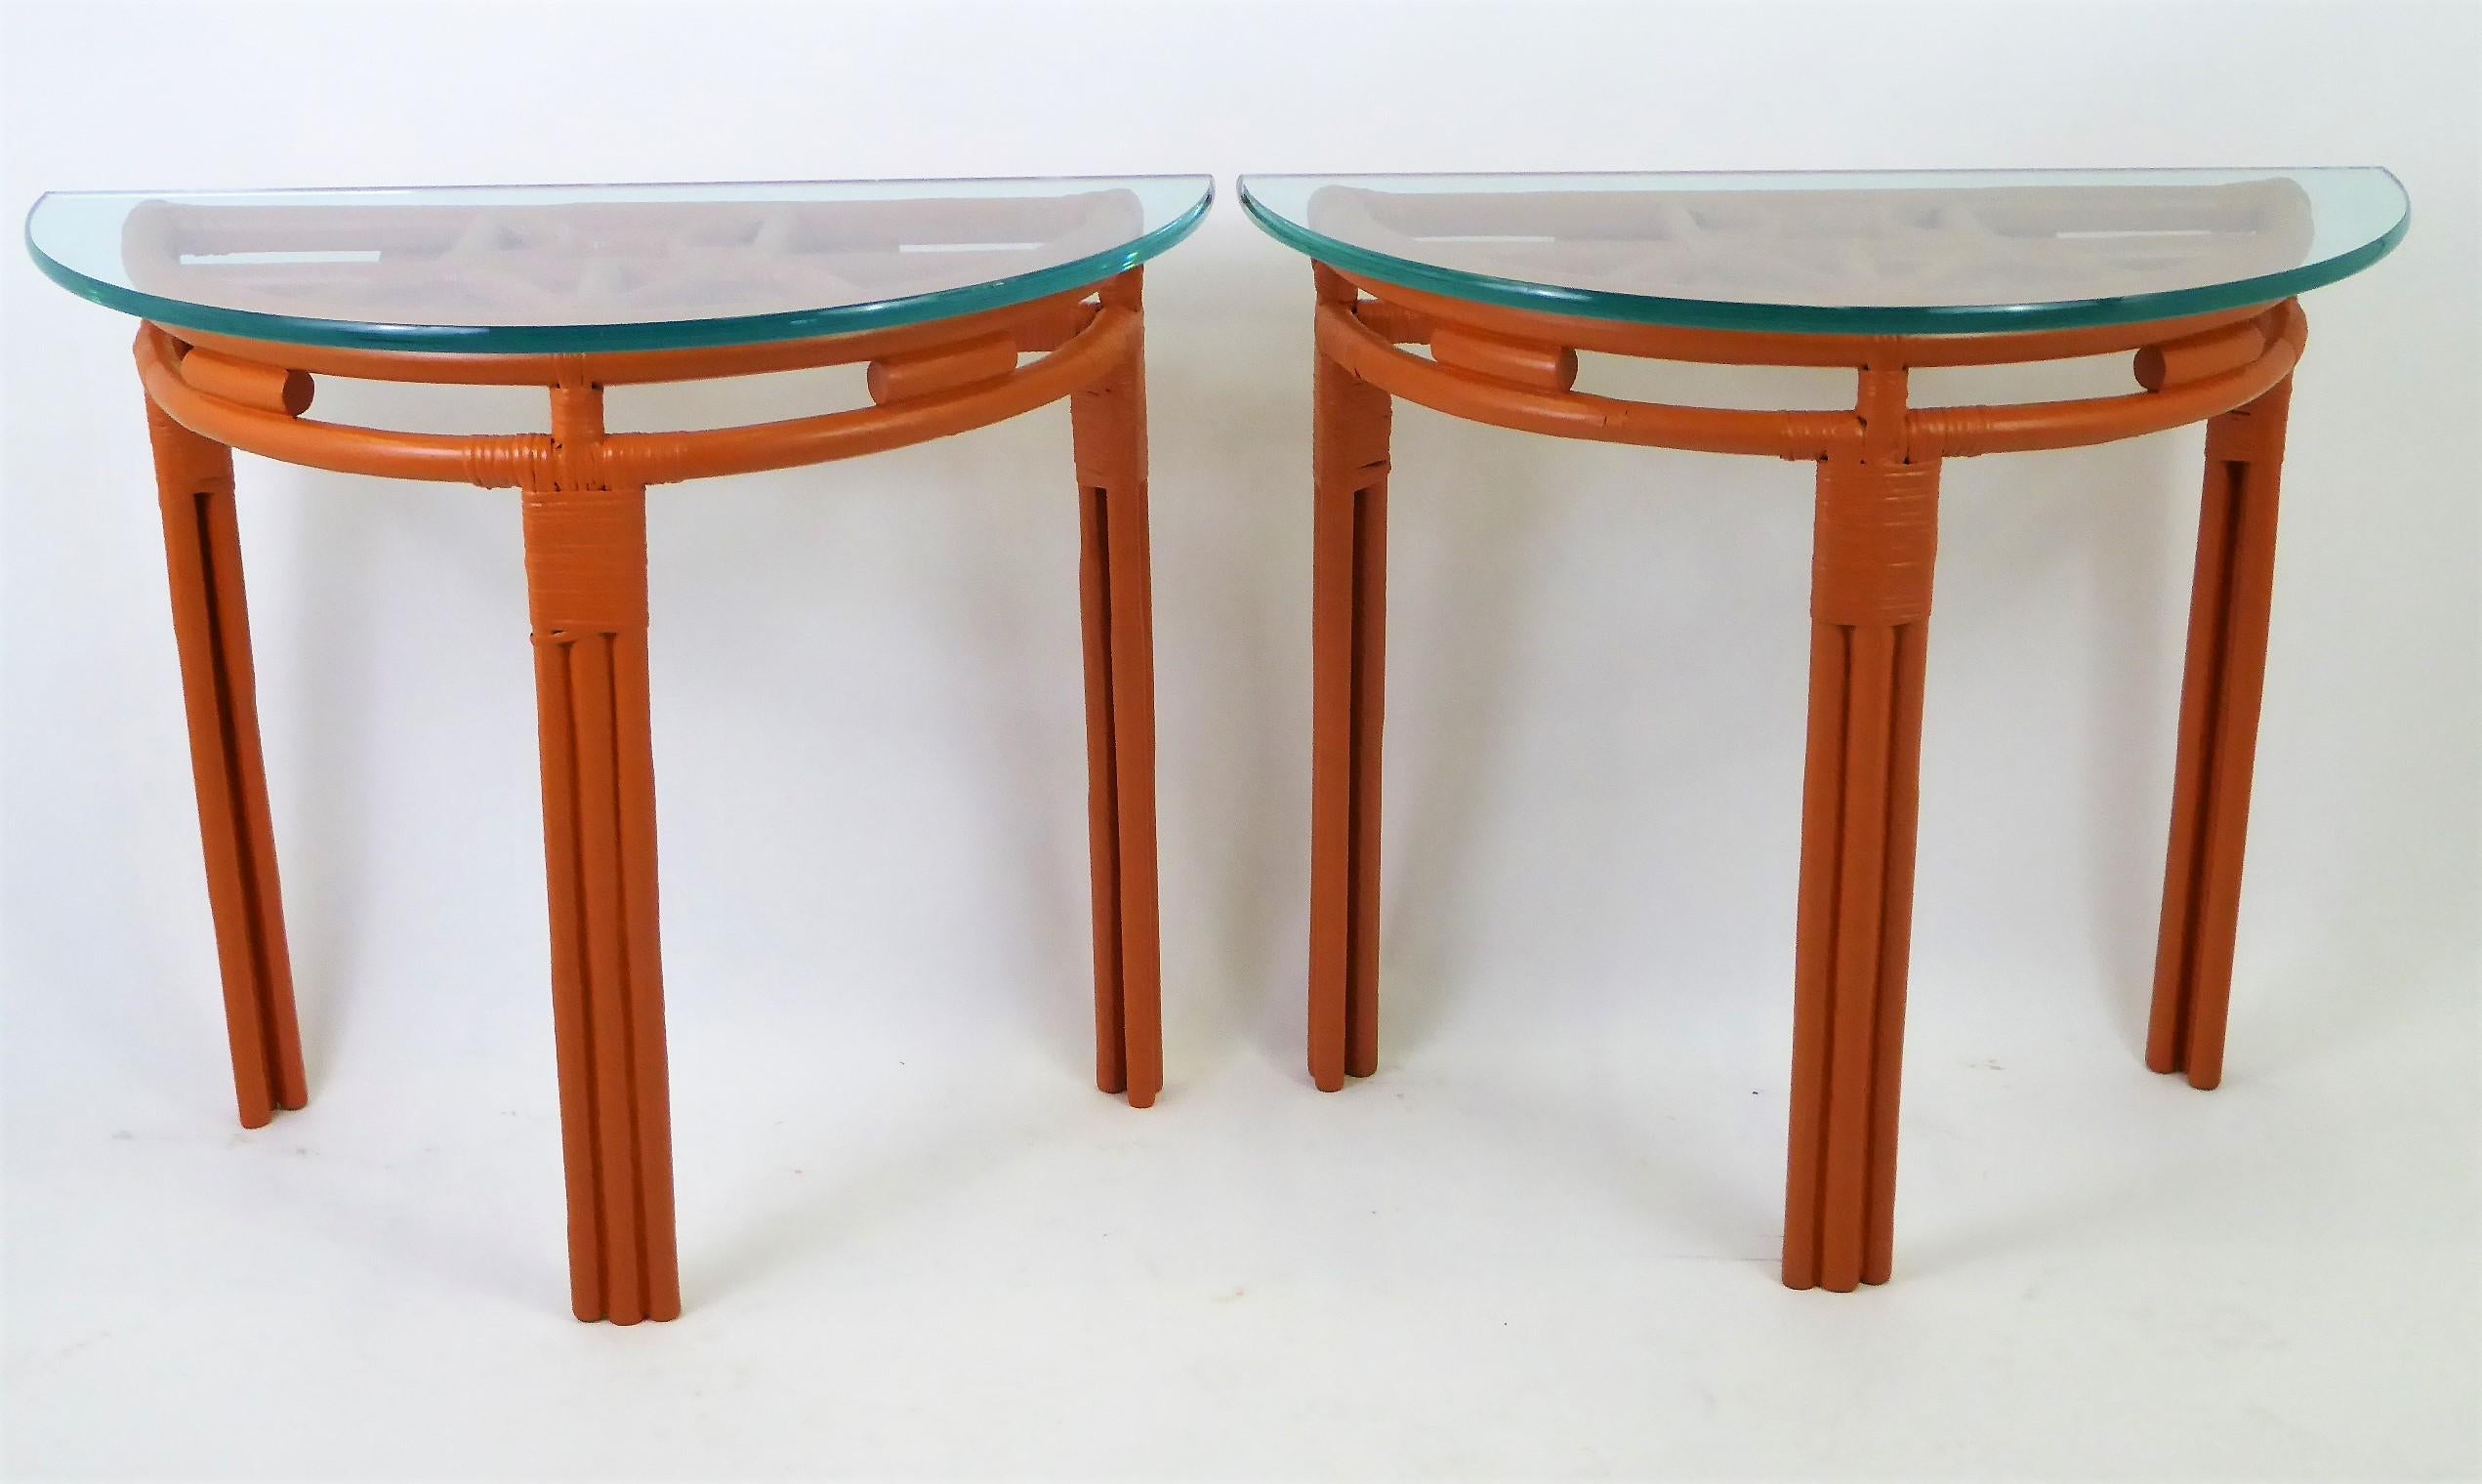 1940s Painted Rattan Demilune Glass Top Consoles in Hermes Orange 2